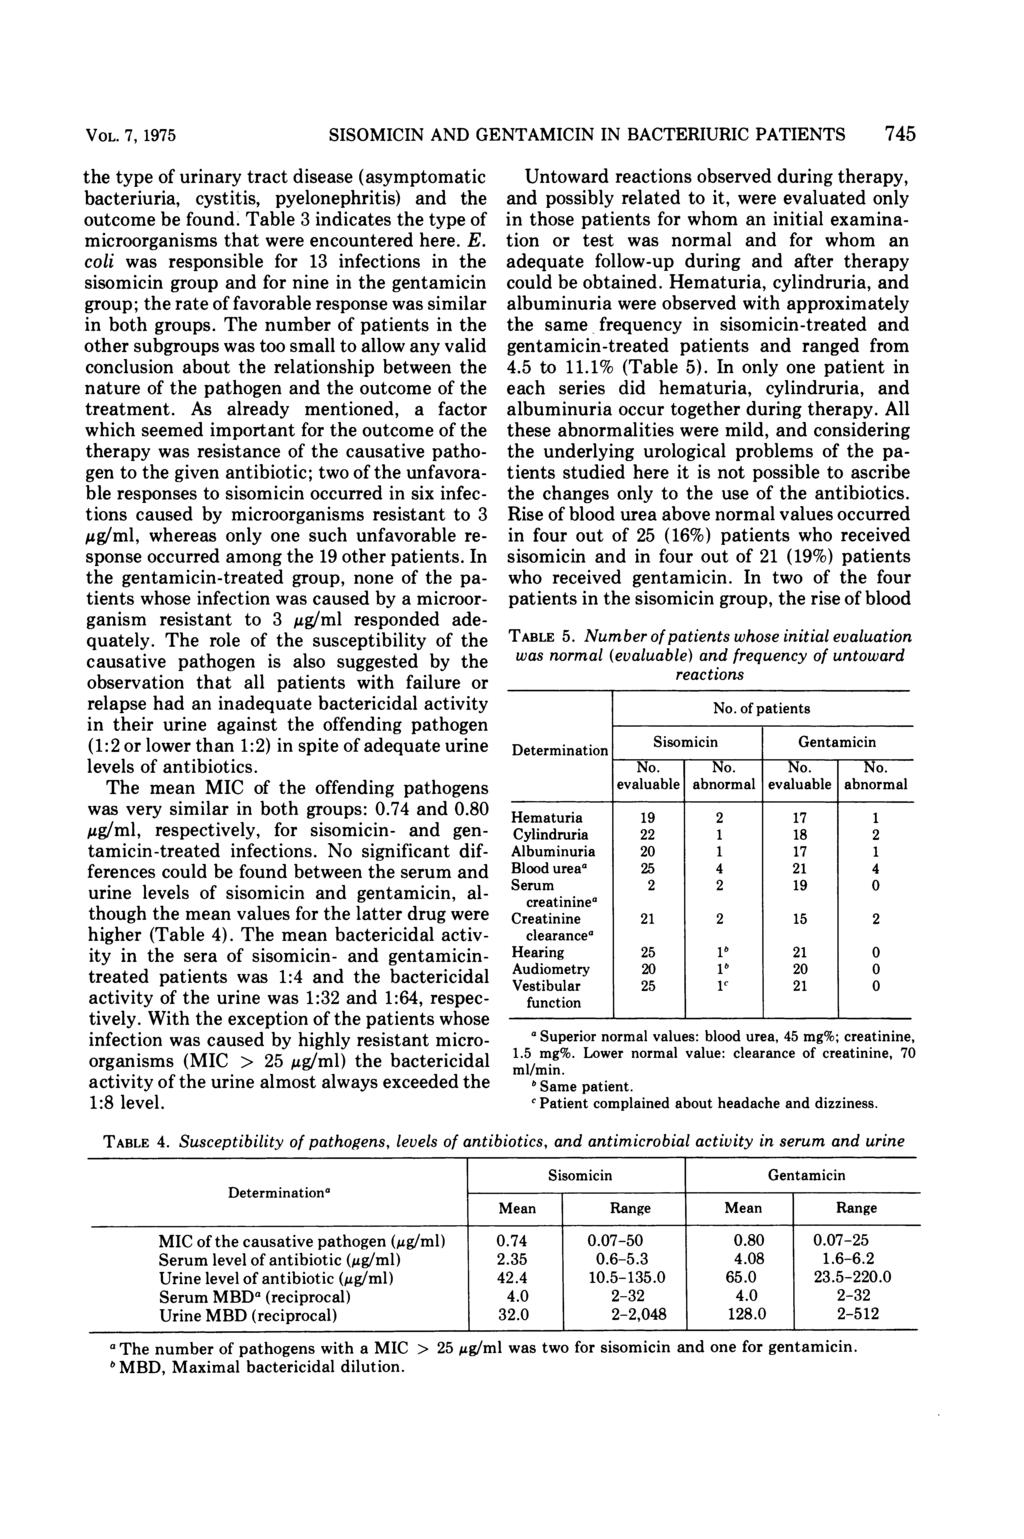 VOL. 7, 1975 the type of urinary tract disease (asymptomatic bacteriuria, cystitis, pyelonephritis) and the outcome be found. Table 3 indicates the type of microorganisms that were encountered here.